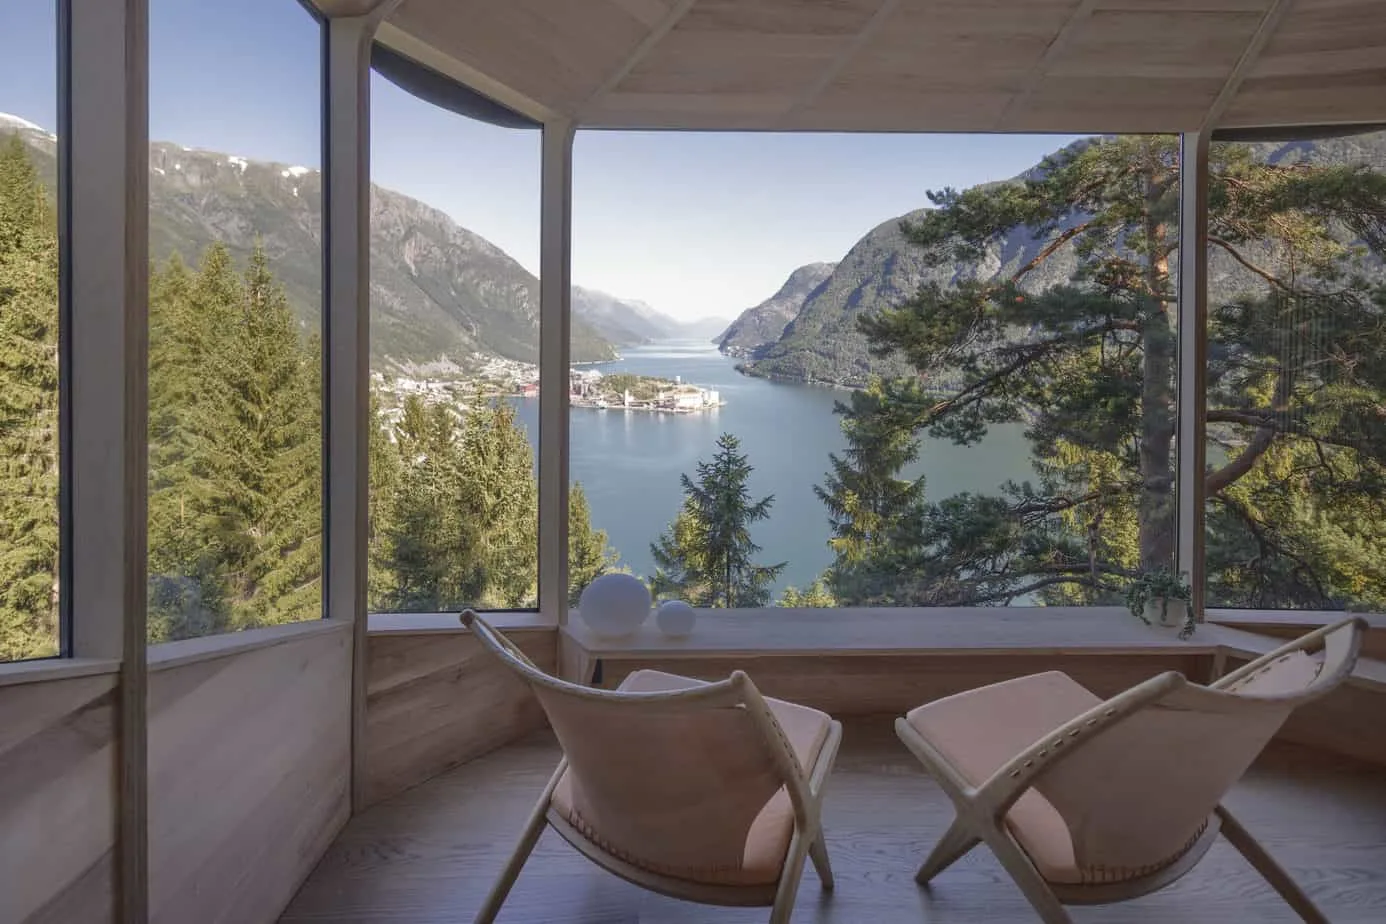 A view from inside the Woodnest cabin in Odda, Norway